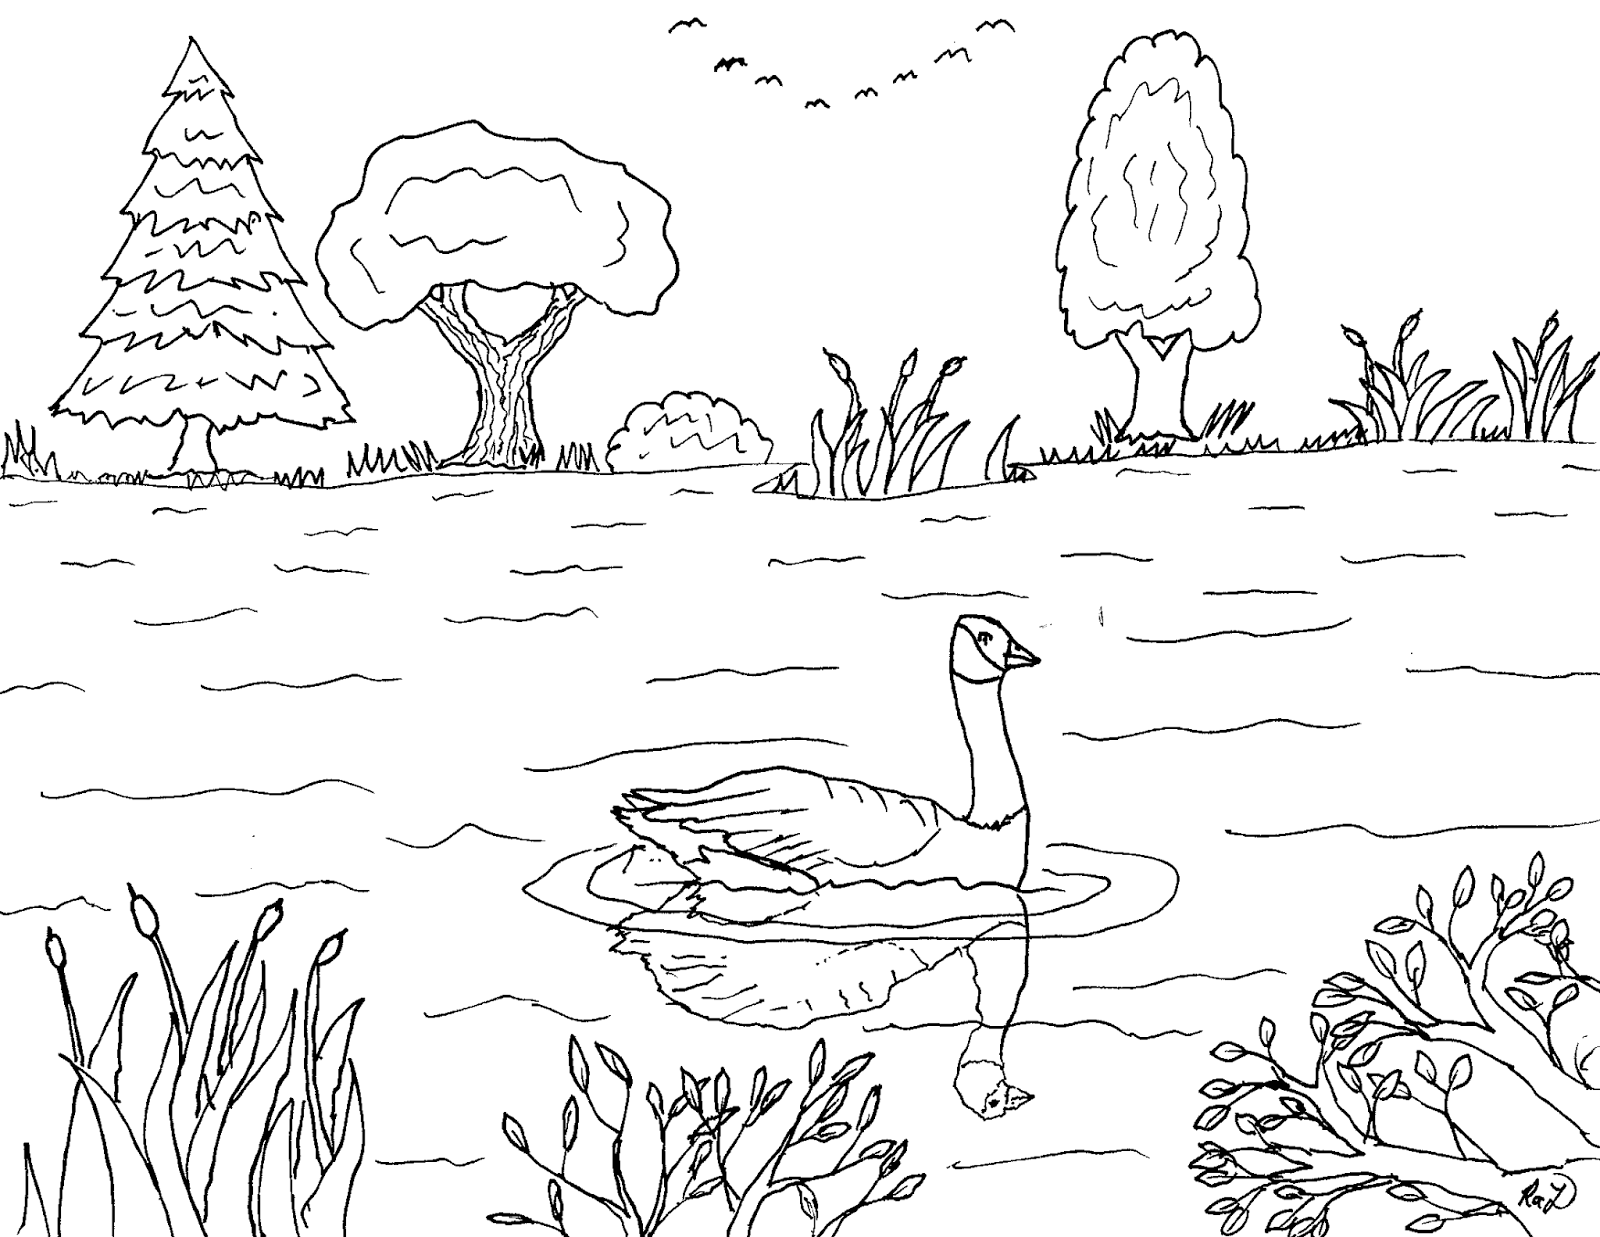 Download Bird Migration Coloring Pages | Let's Coloring The World